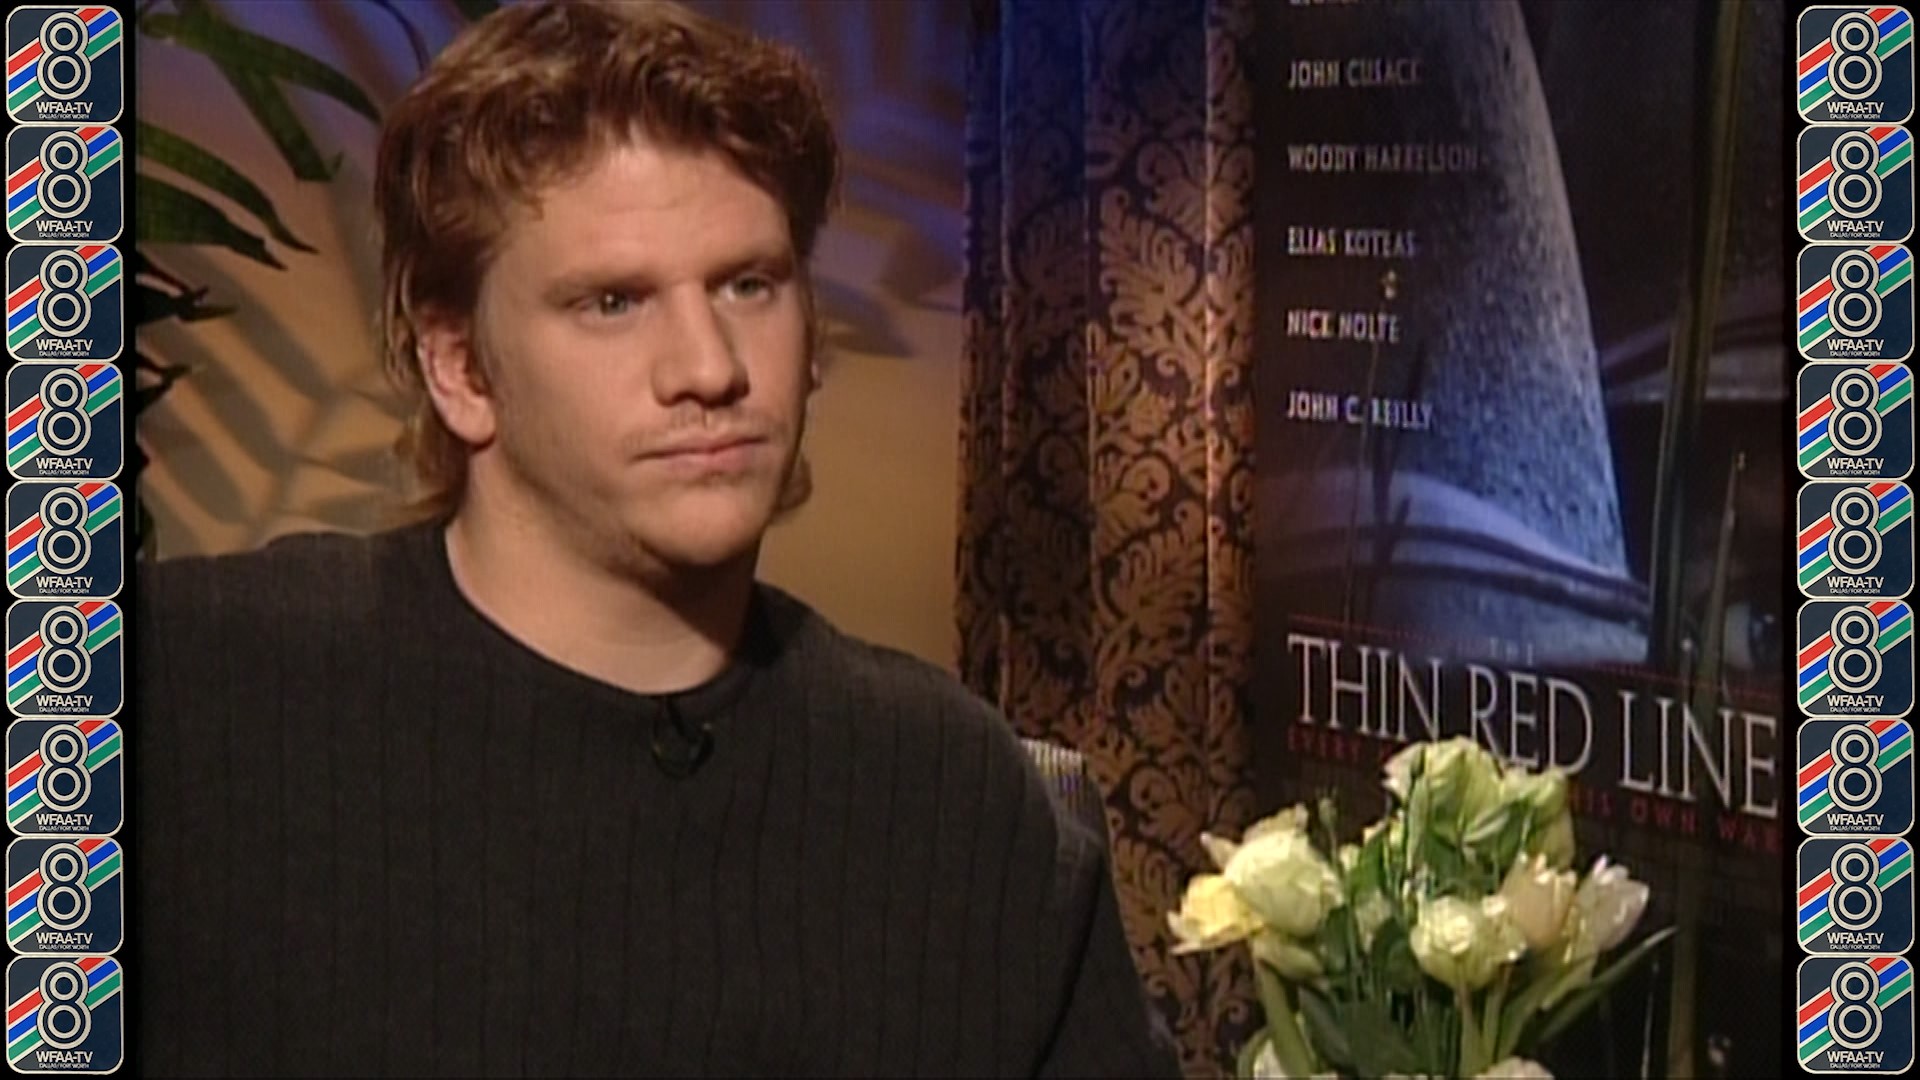 Dash Mihok sat down with WFAA to talk about taking on the role of Pvt. 1cl. Doll in the 1998 film The Thin Red Line.